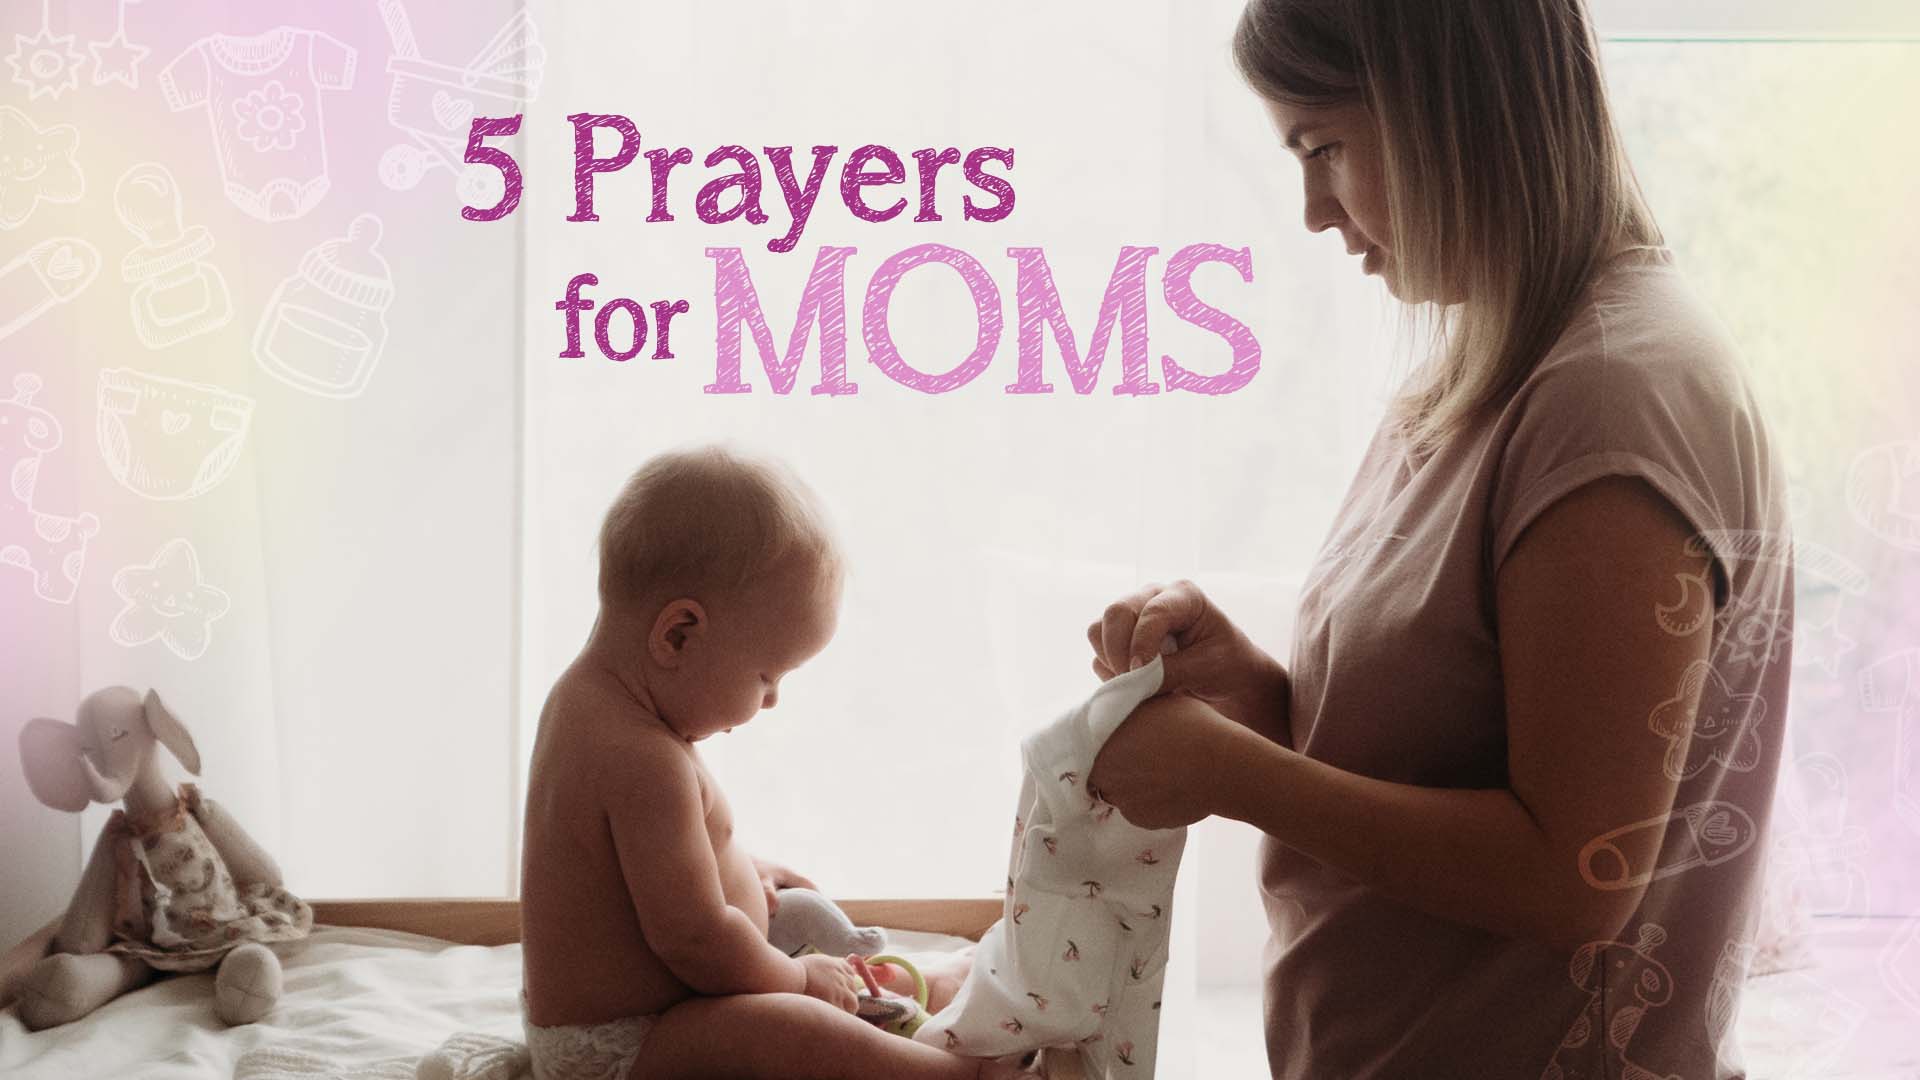 5 Prayers for Moms in Need